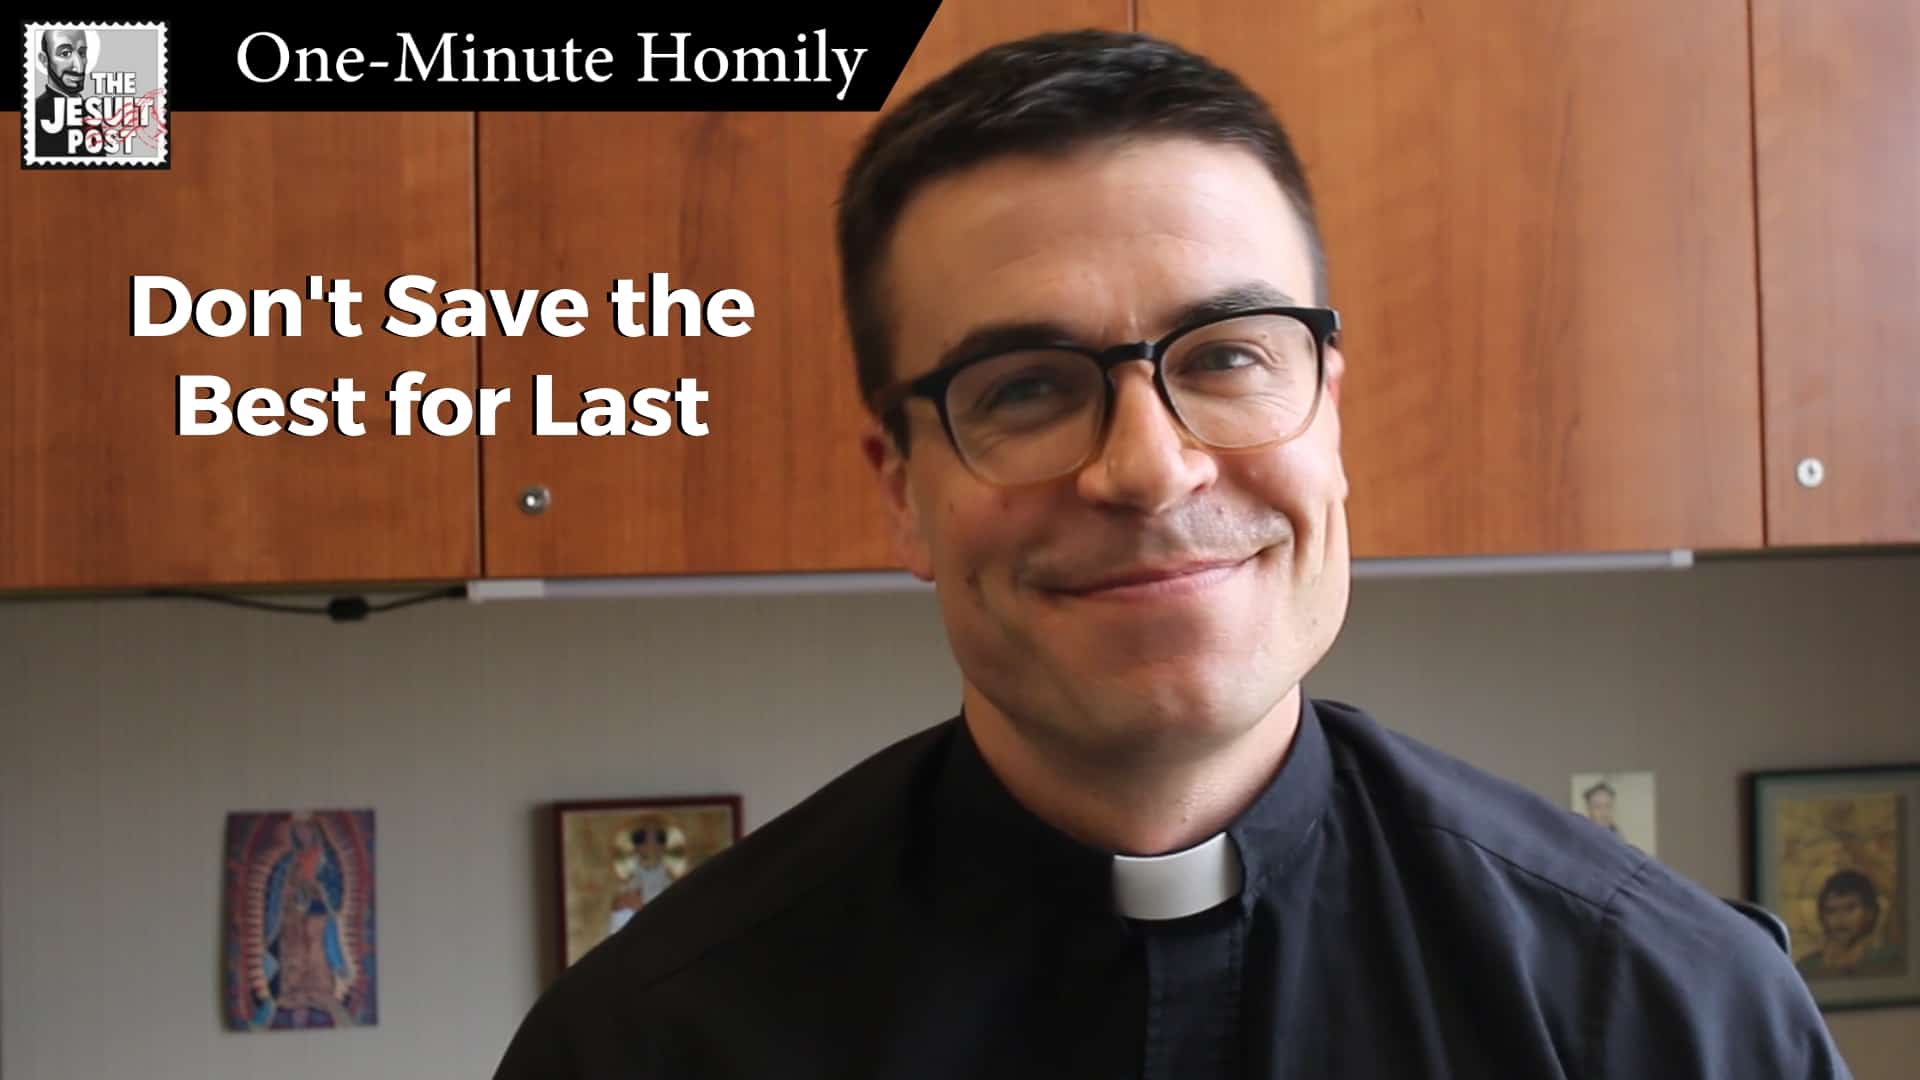 One-Minute Homily: “Don’t Save the Best for Last”